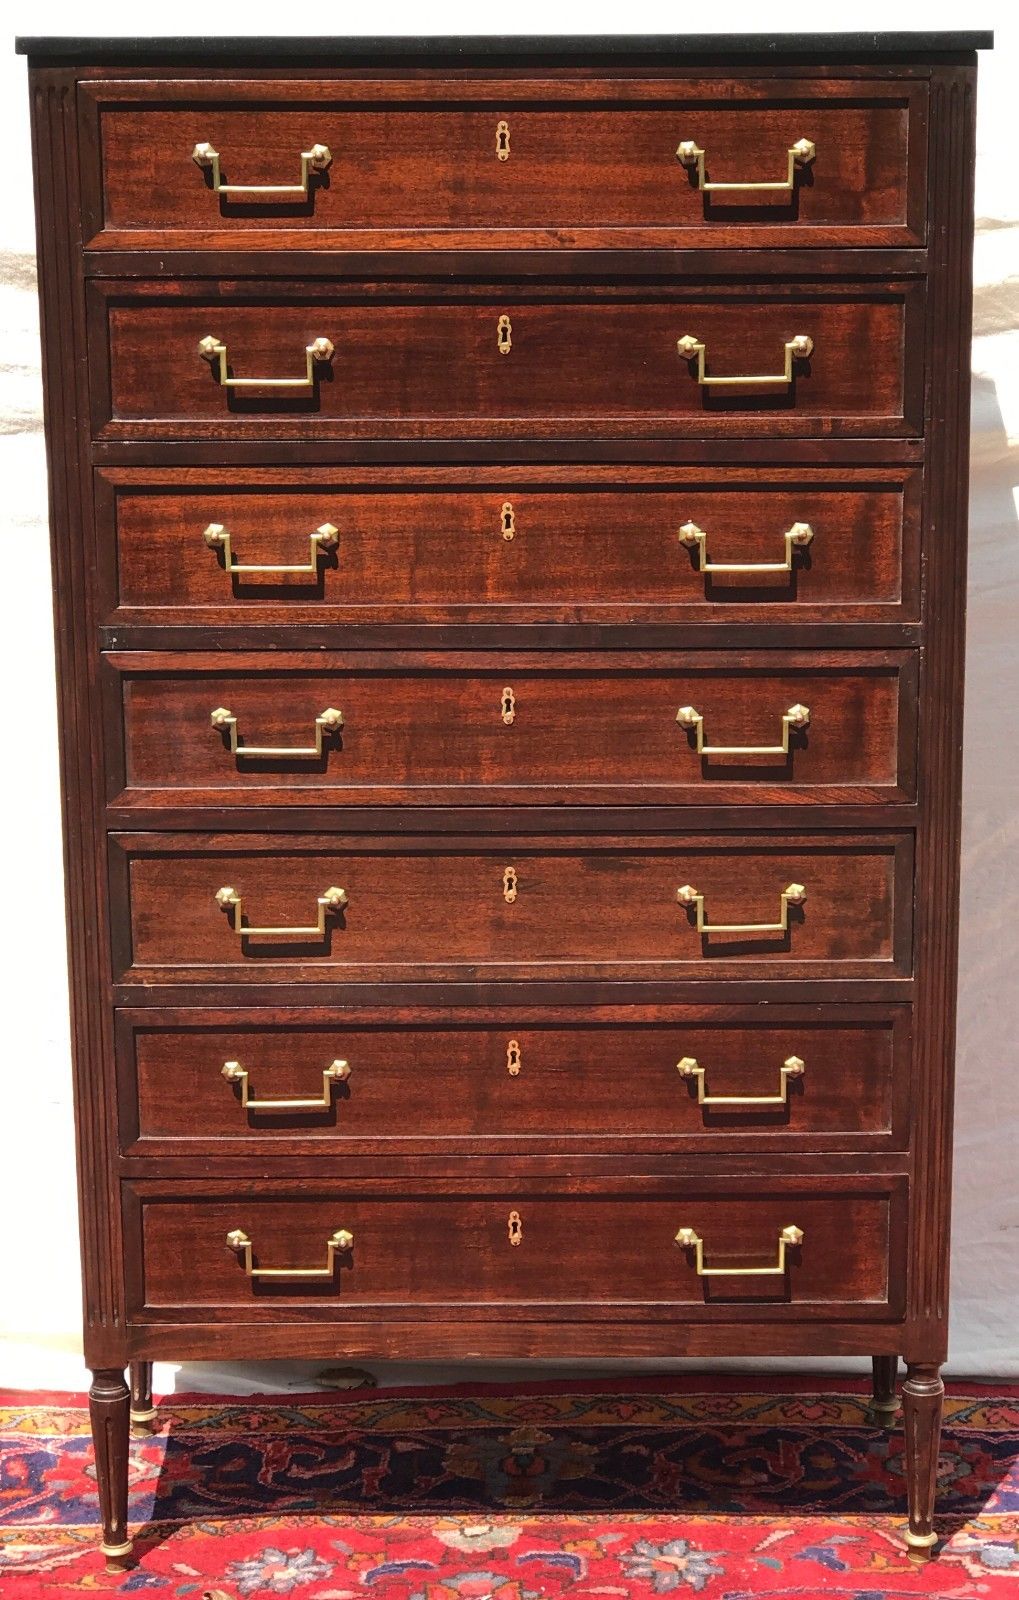 RARE FINE FRENCH DIRECTOIRE STYLED 7 DRAWER MARBLE TOPPED TALL CHEST-PRICE CUT!